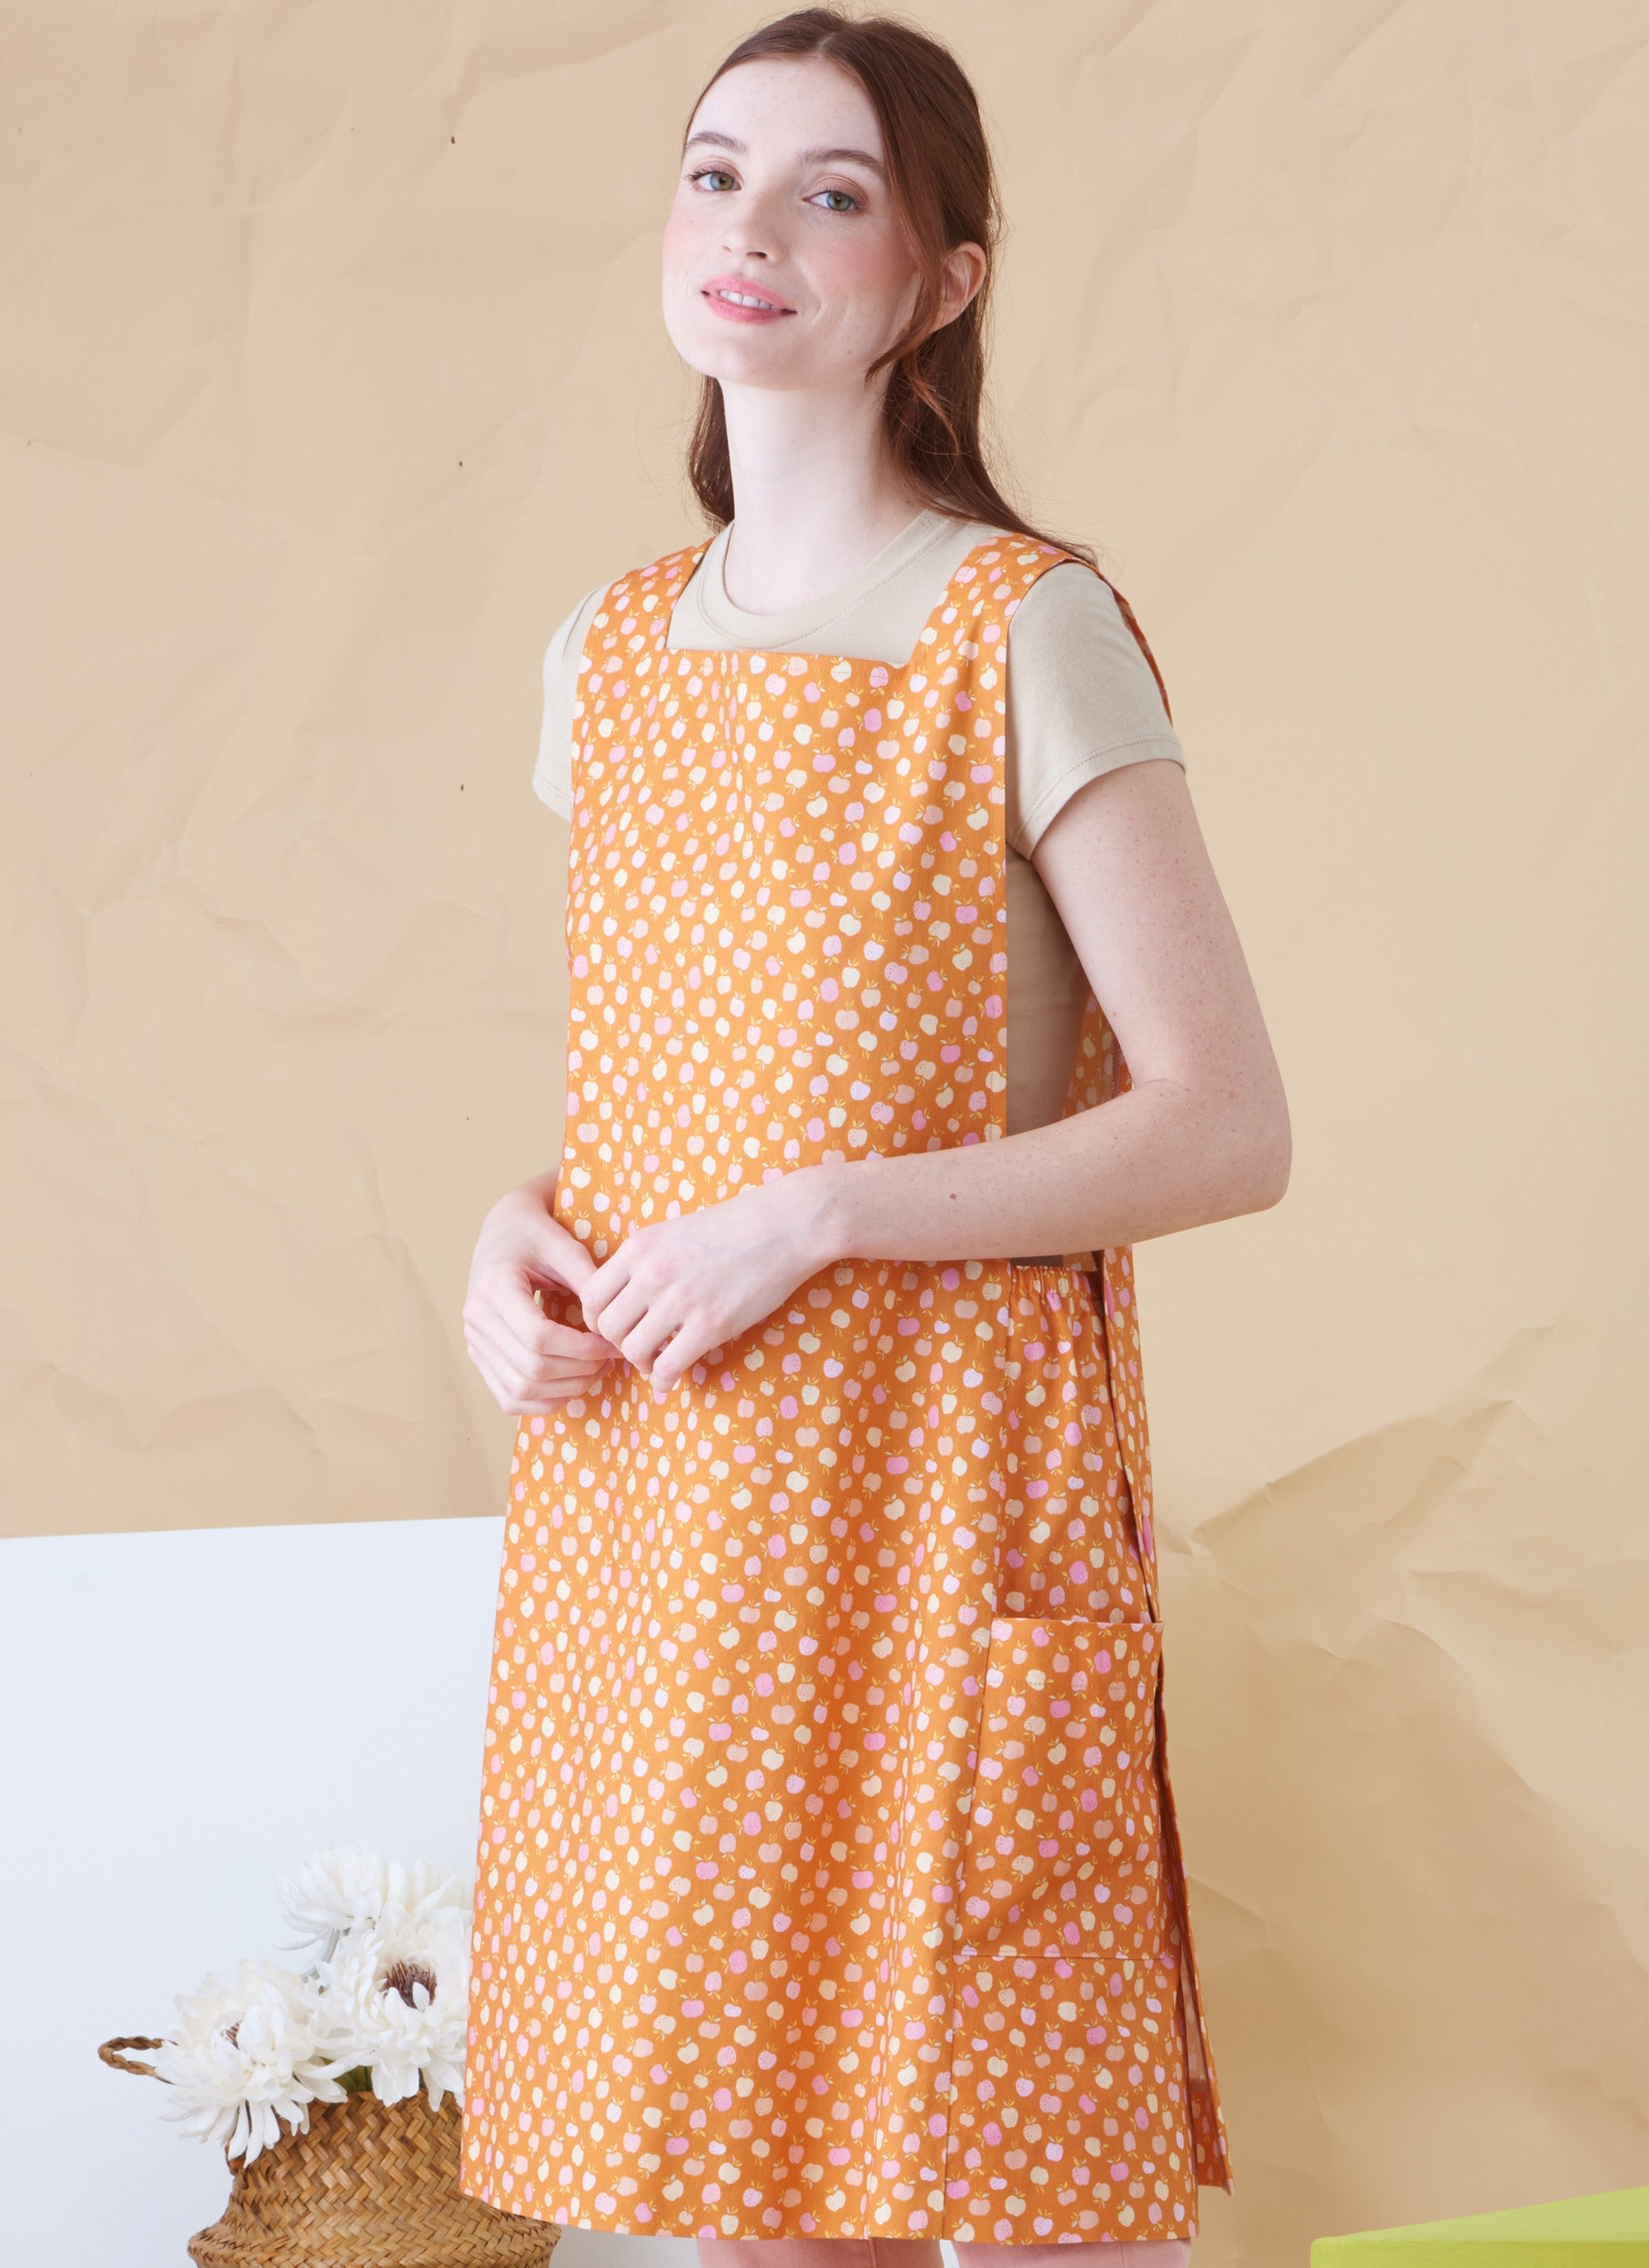 Simplicity 9766 sewing pattern Misses' Tabard Aprons by Elaine Heigl Designs from Jaycotts Sewing Supplies